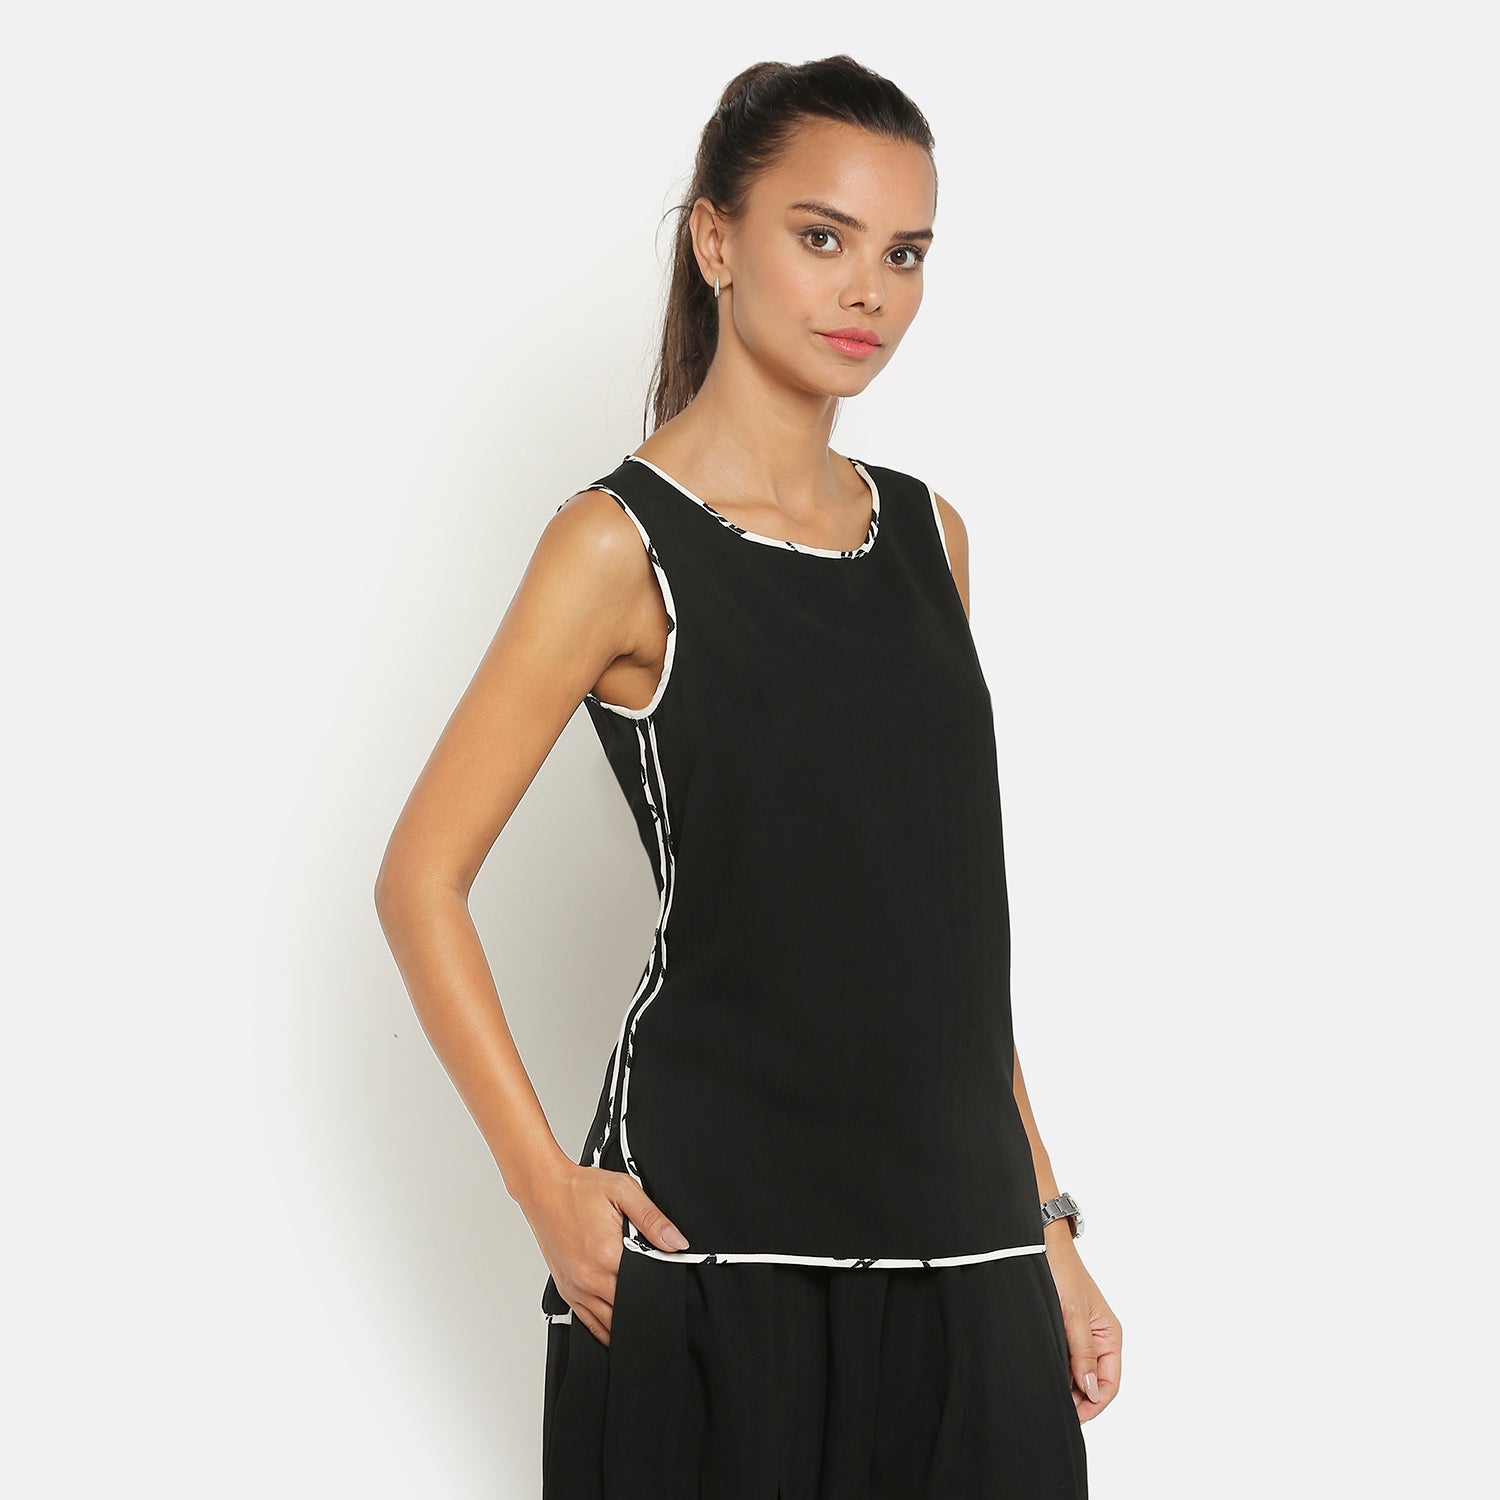 Black Sleeveless Top With Contrast Piping